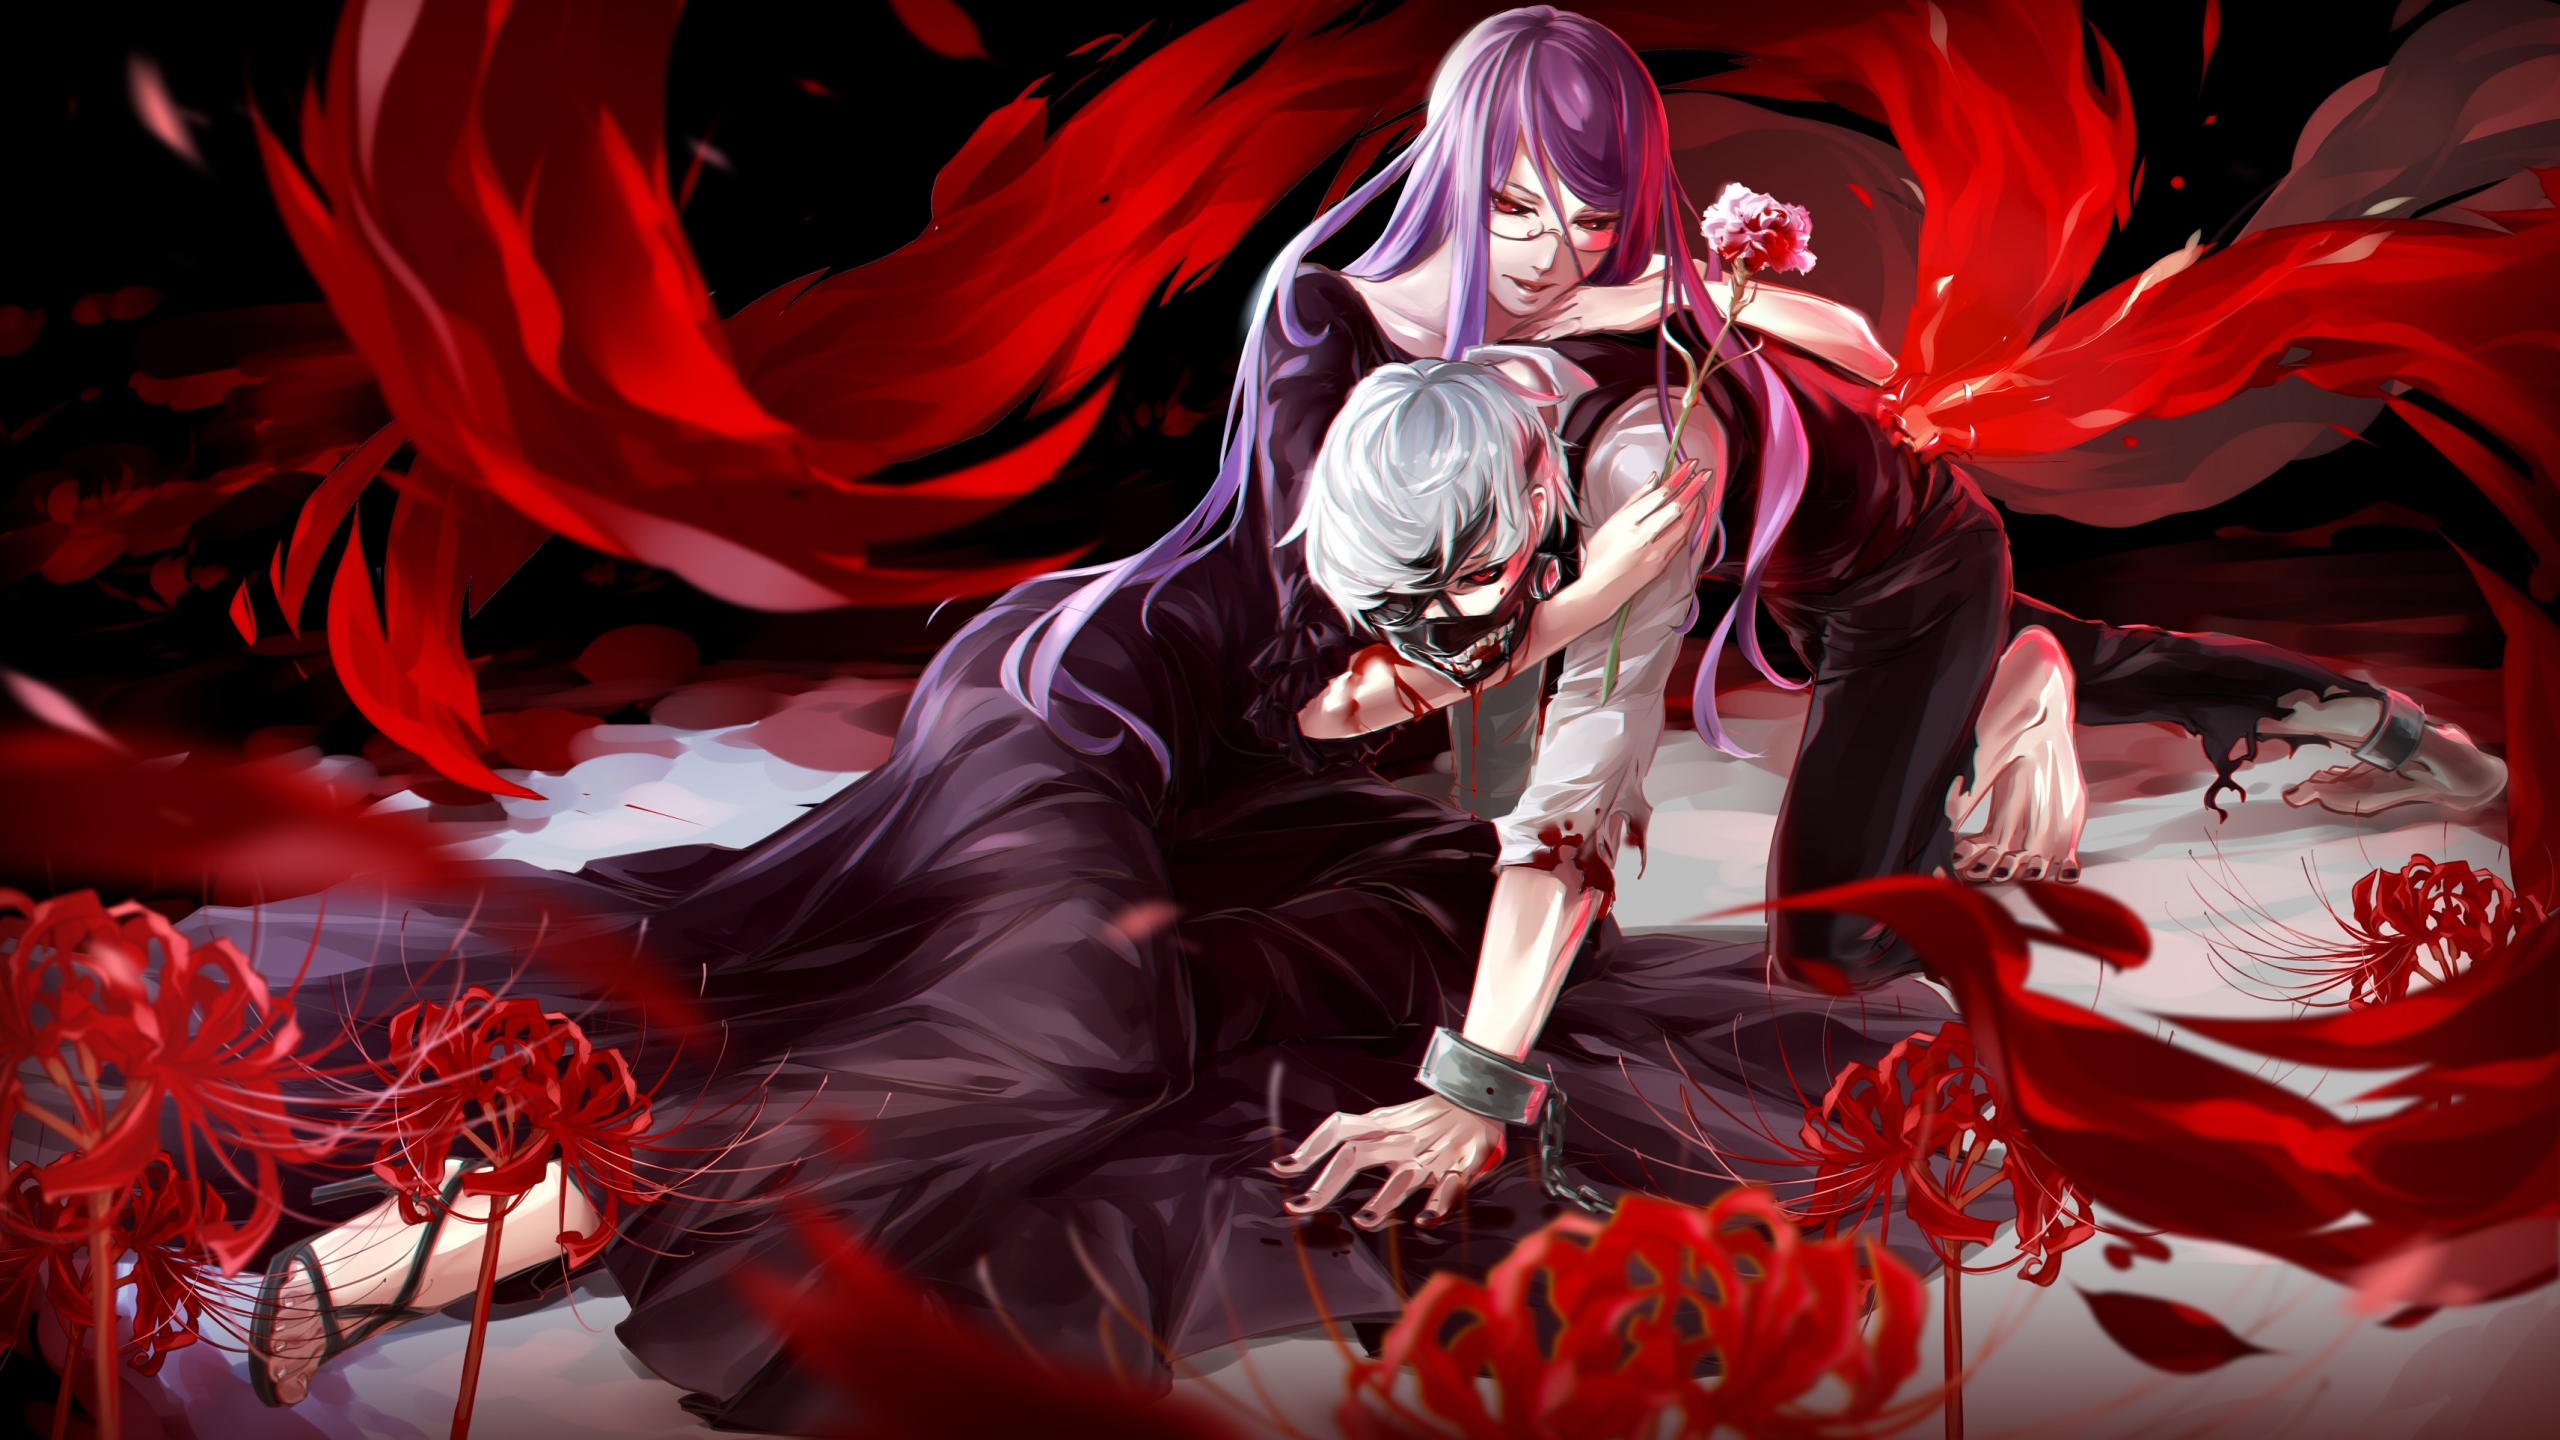 Characters from Tokyo Ghoul Anime Wallpaper ID:4557